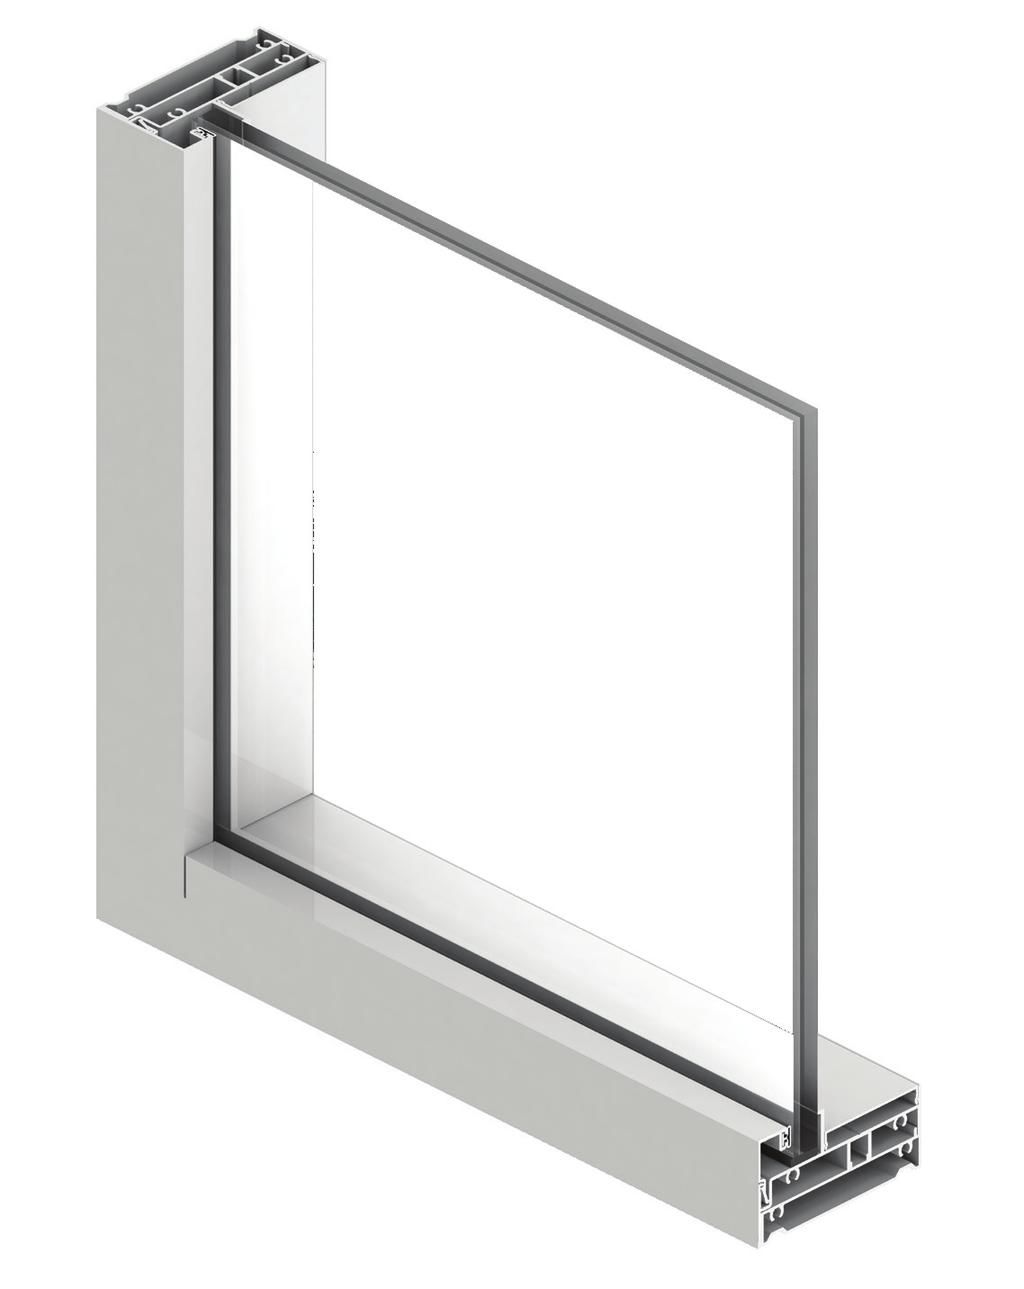 EL-150 The EL-150 is a fixed window available in a variety of shapes to meet a wide range of applications.